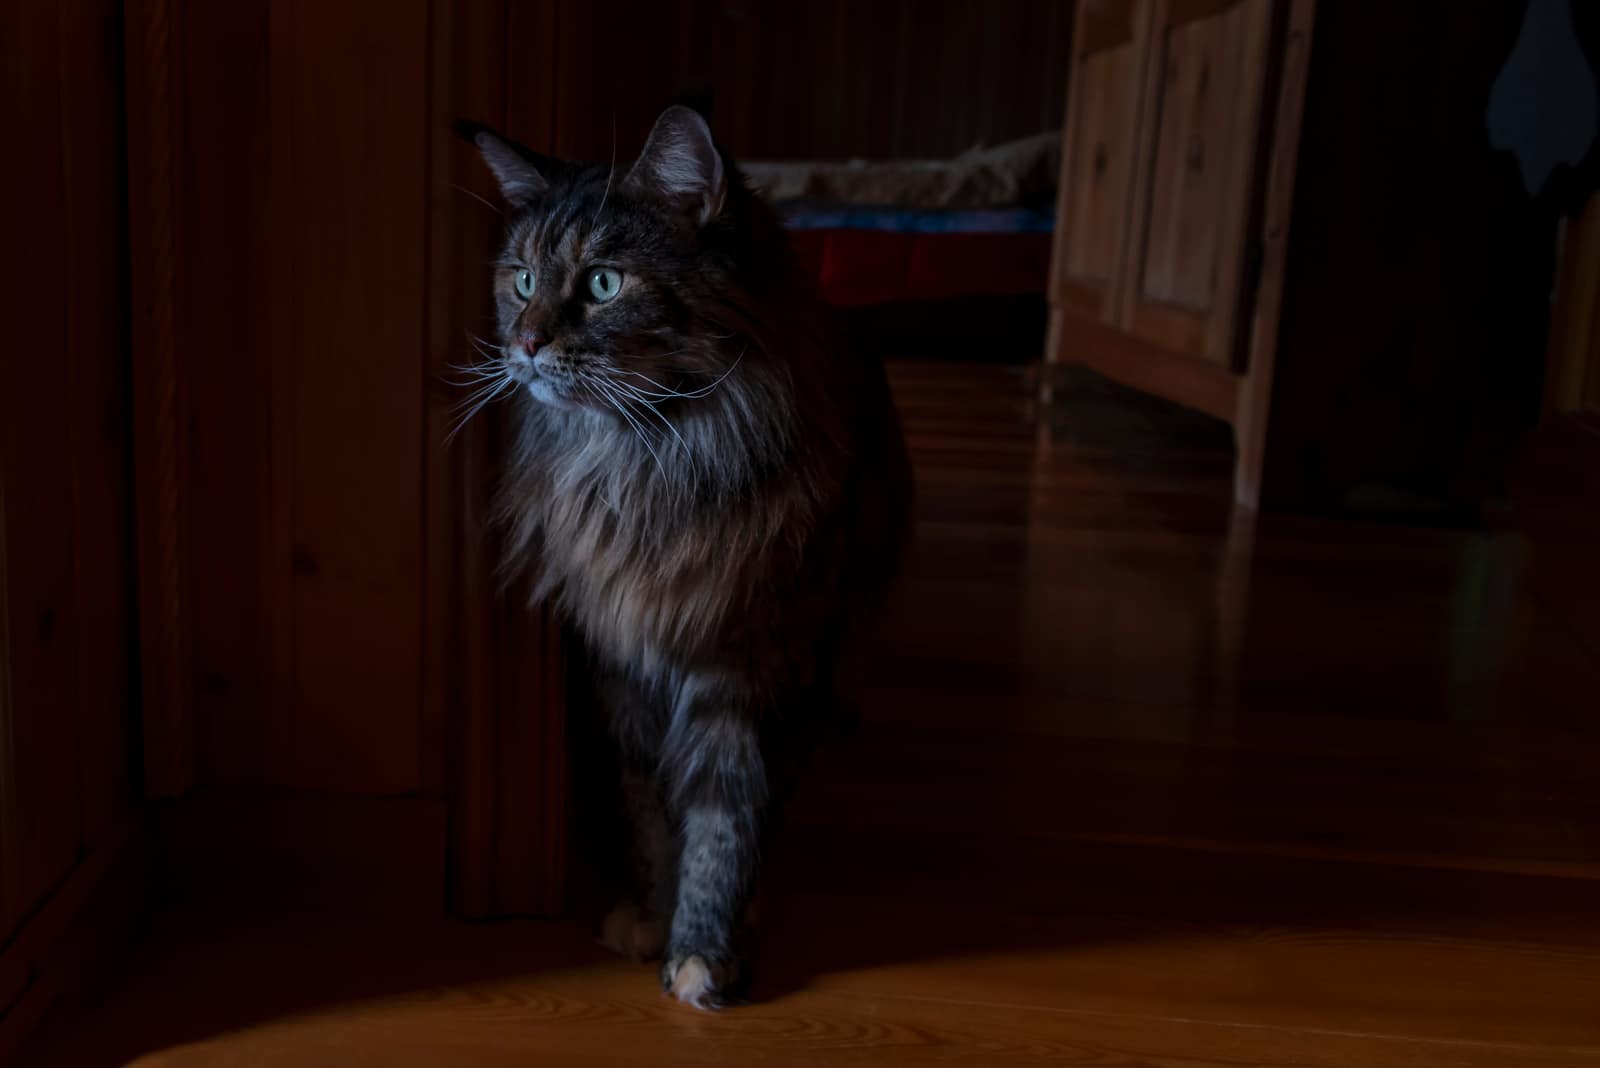 The Maine Coon walks around the house in the dark